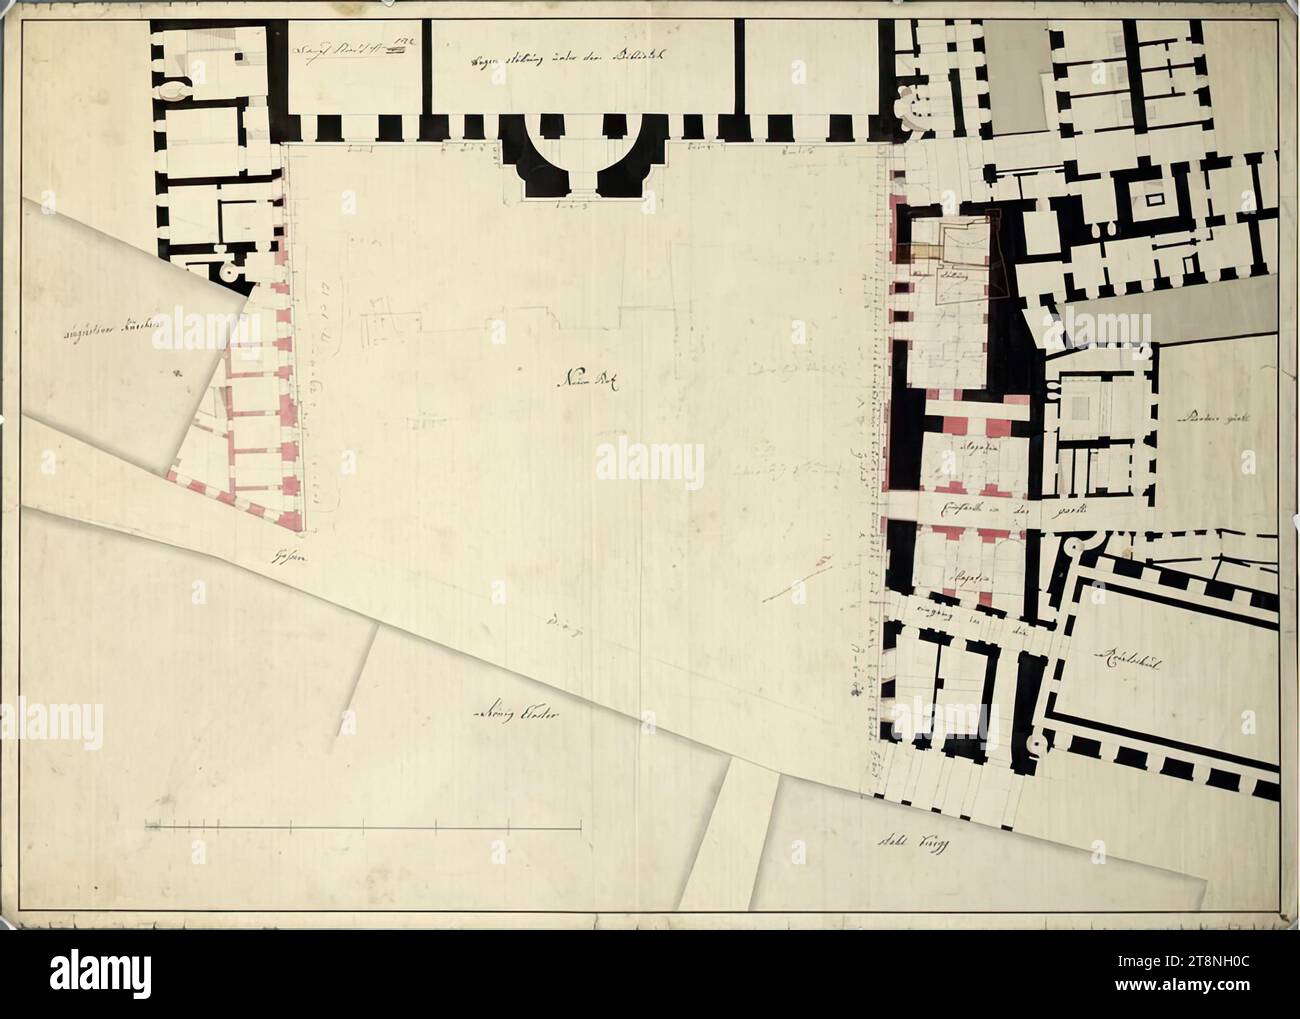 Vienna I, Hofburg, overall plan, court library and adjoining wings, ground floor, floor plan, around 1759, plan, chalk (preliminary drawing); pen in black; black, red and gray wash, sheet: 57.5 x 80 cm, recto: 'Baupl. city no 142.'; Room labels: tw. Notations verso: 'Grundriss des Neues Biblioteck plaz'; 'No 142, I Stock Photo